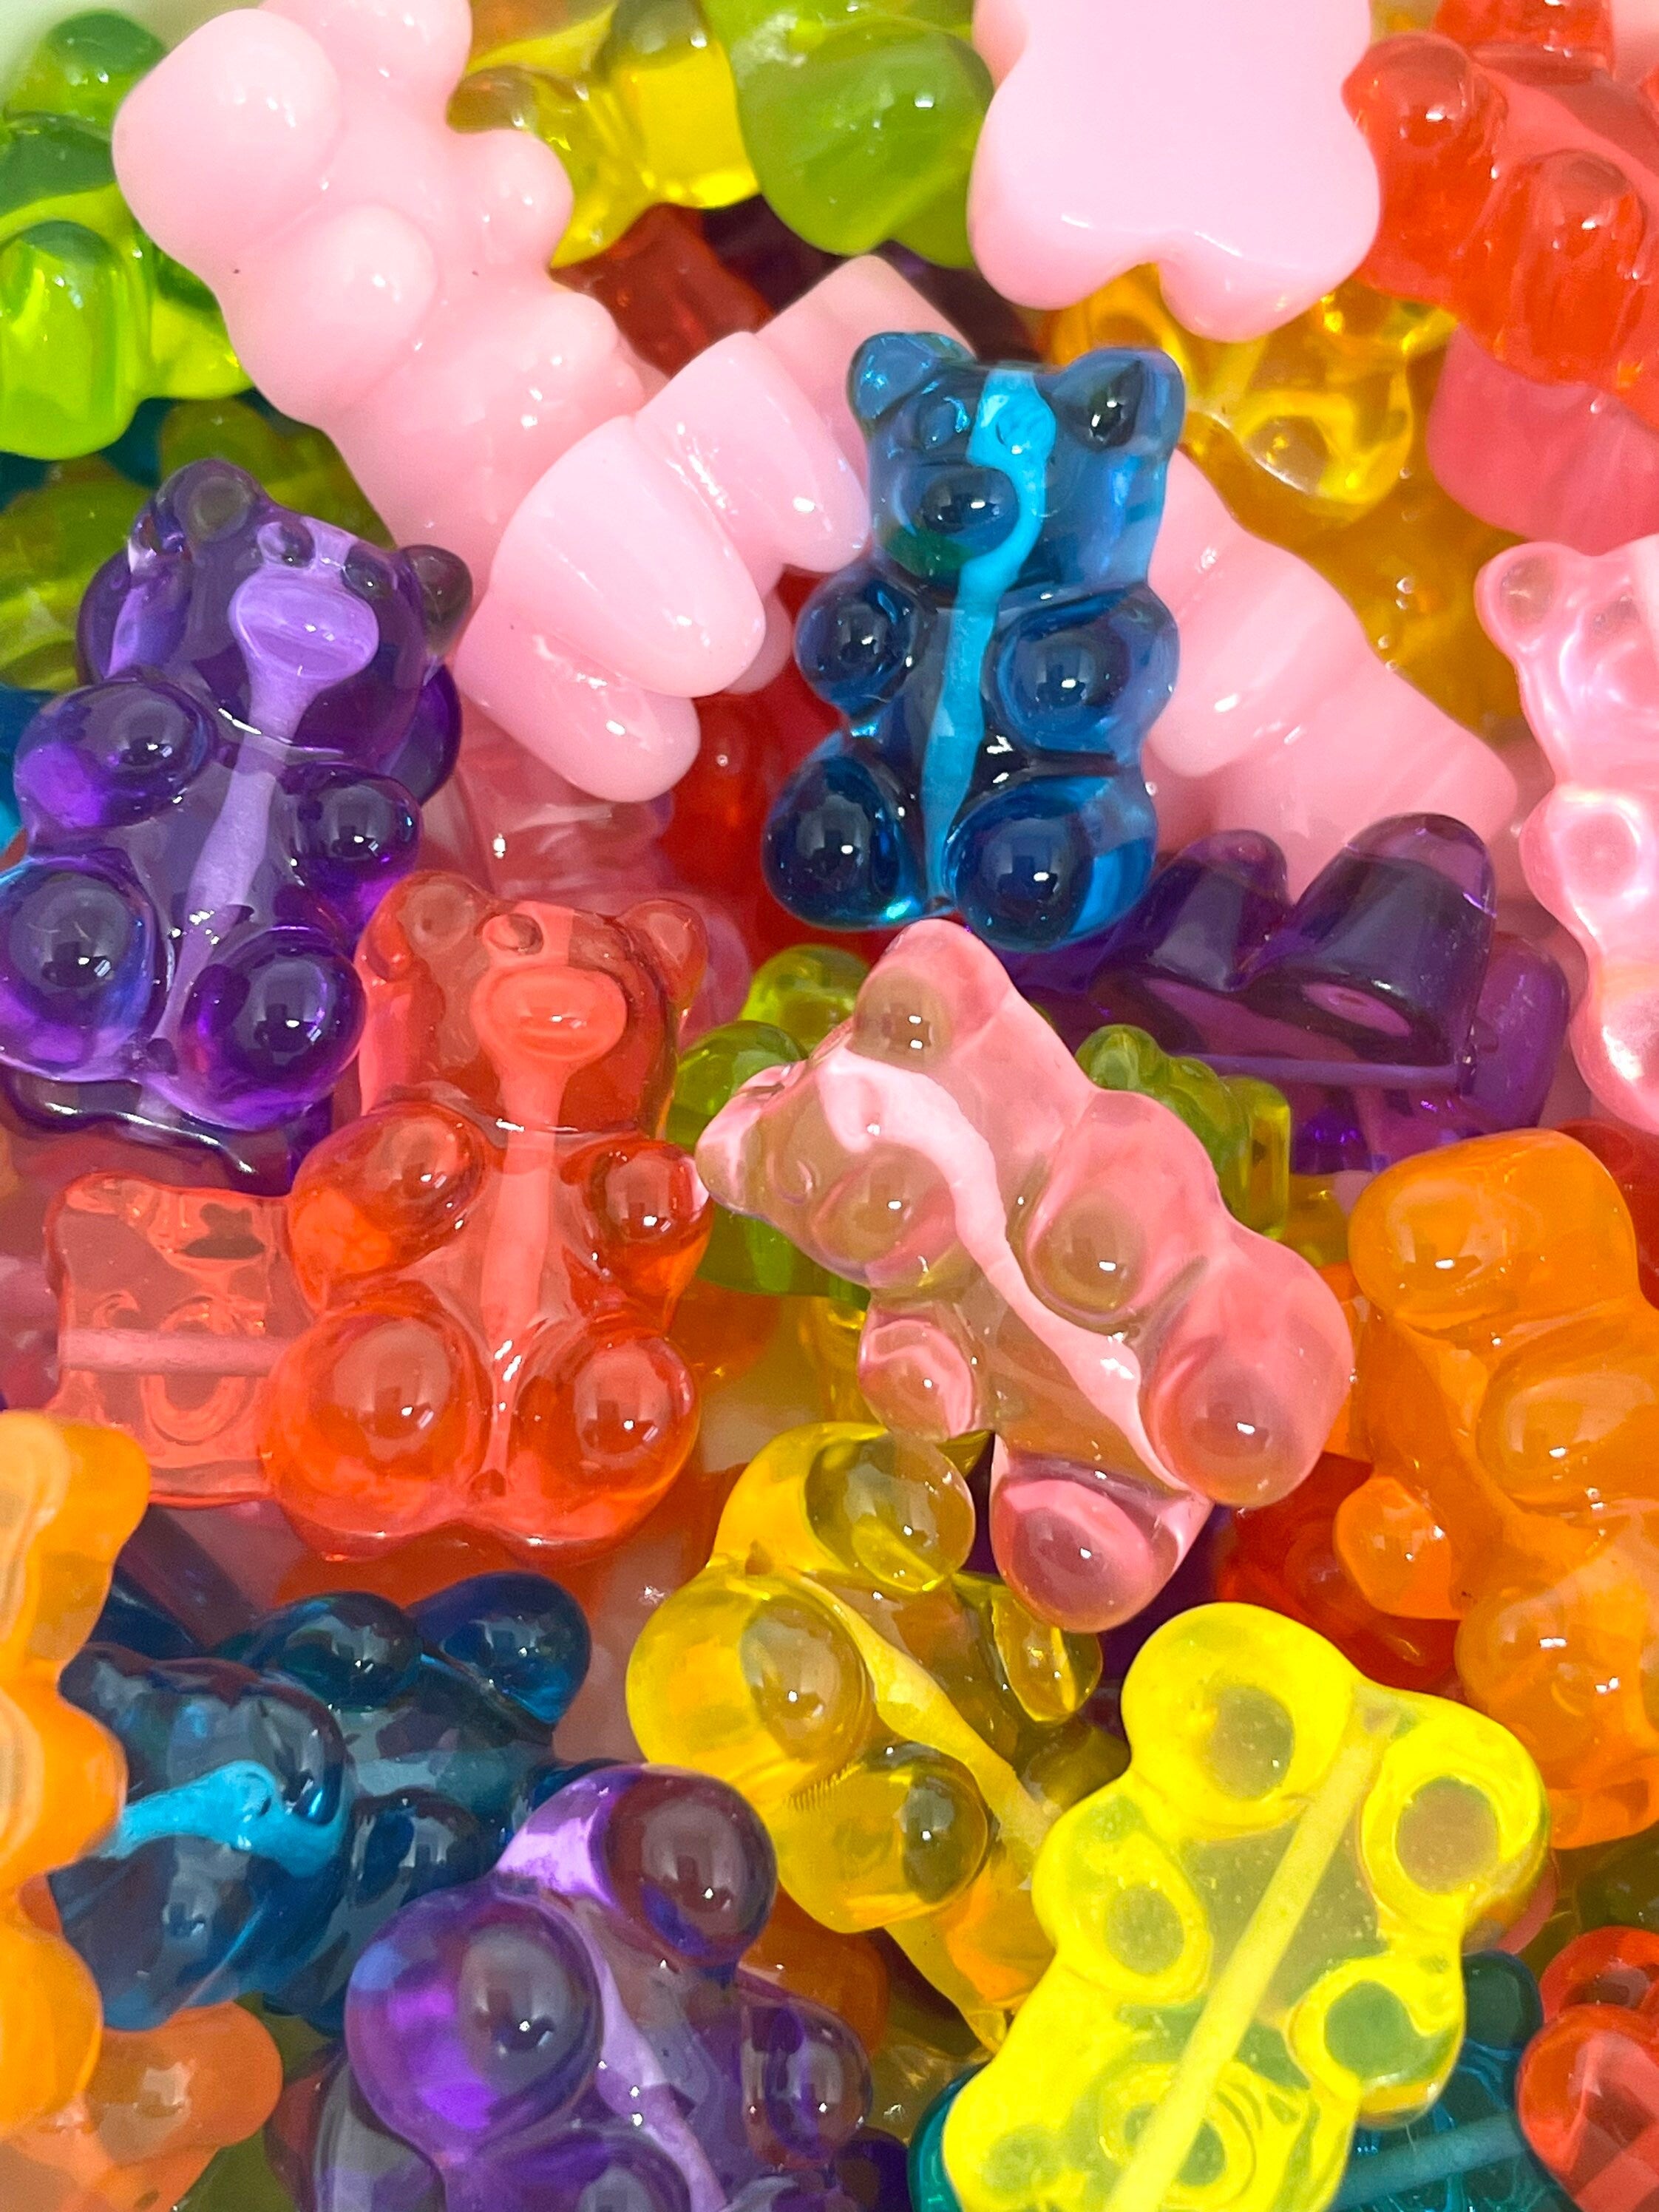 Gummy Bear Charms Jewelry Making, Accessories Making Jewelry